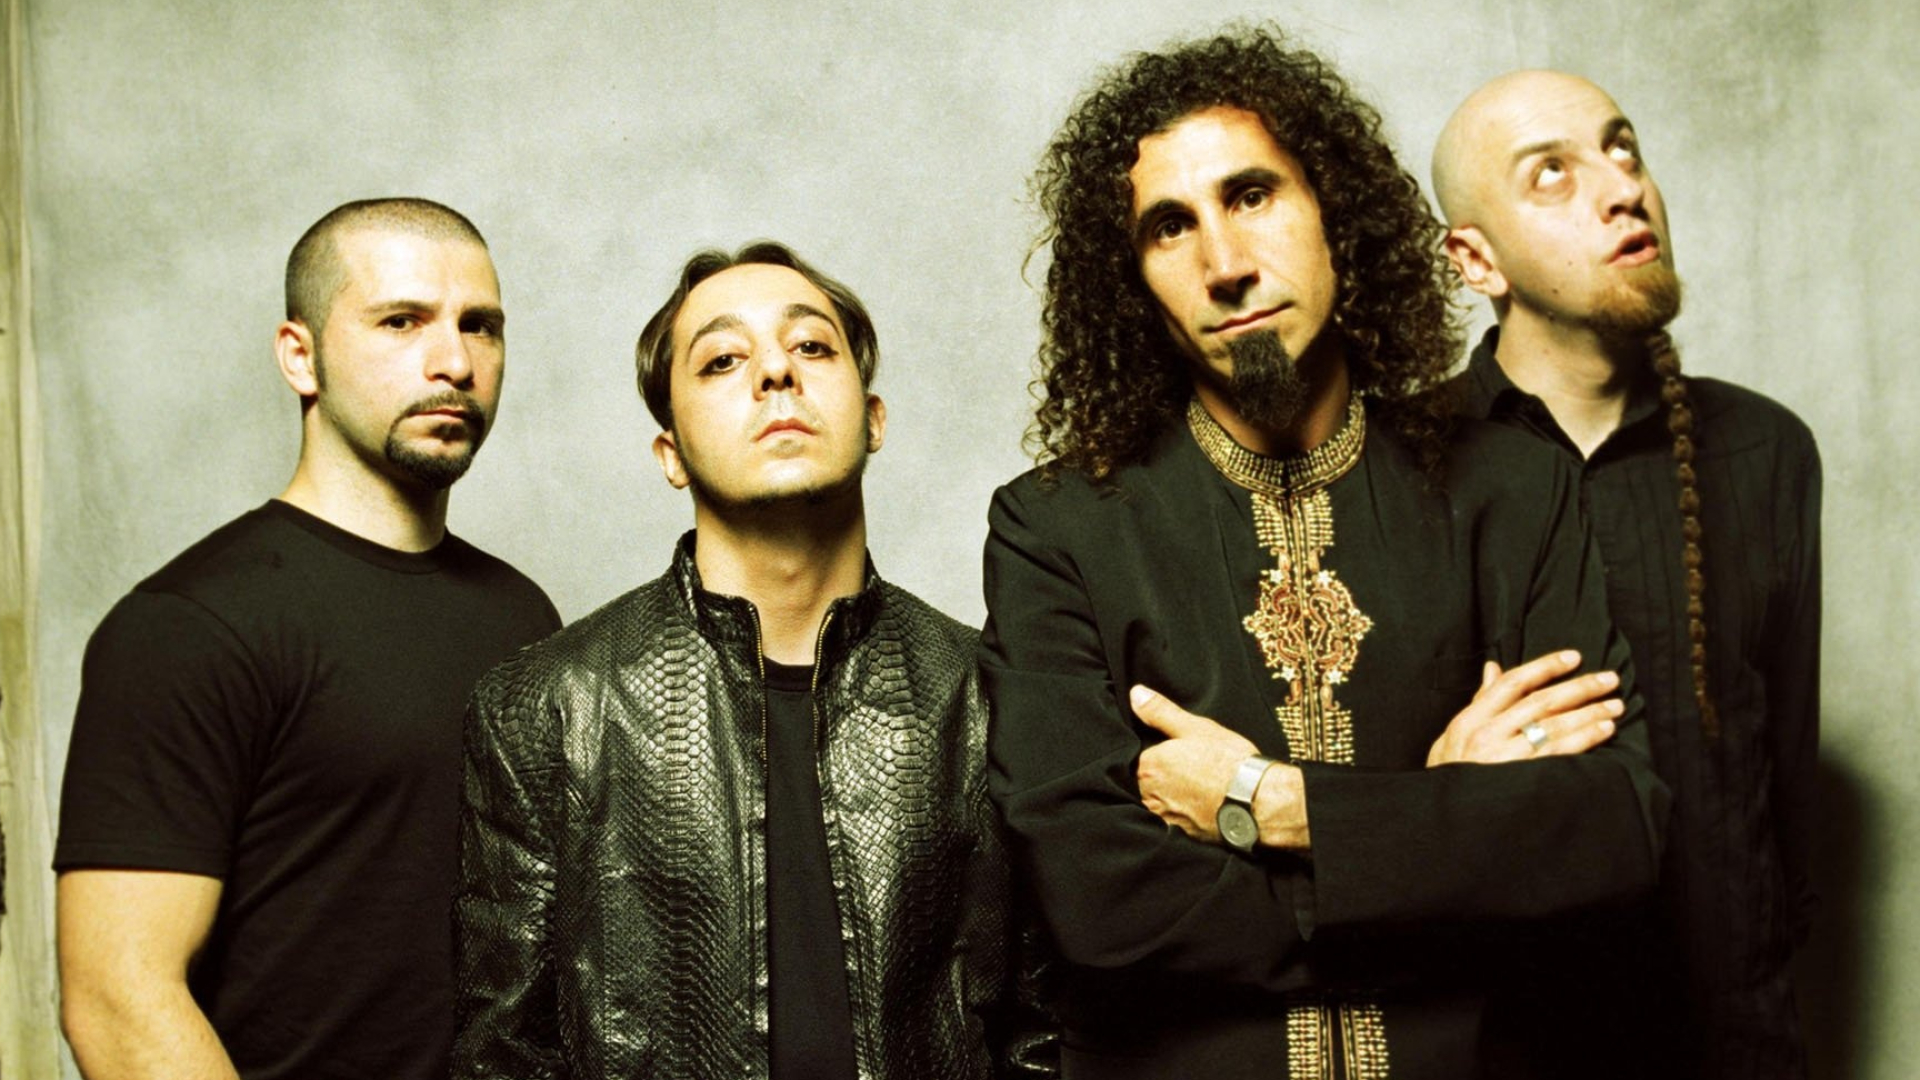 Daron Malakian, System of a Down, Faith No More, and Korn's post, Teasing fans, Music collaboration, 1920x1080 Full HD Desktop